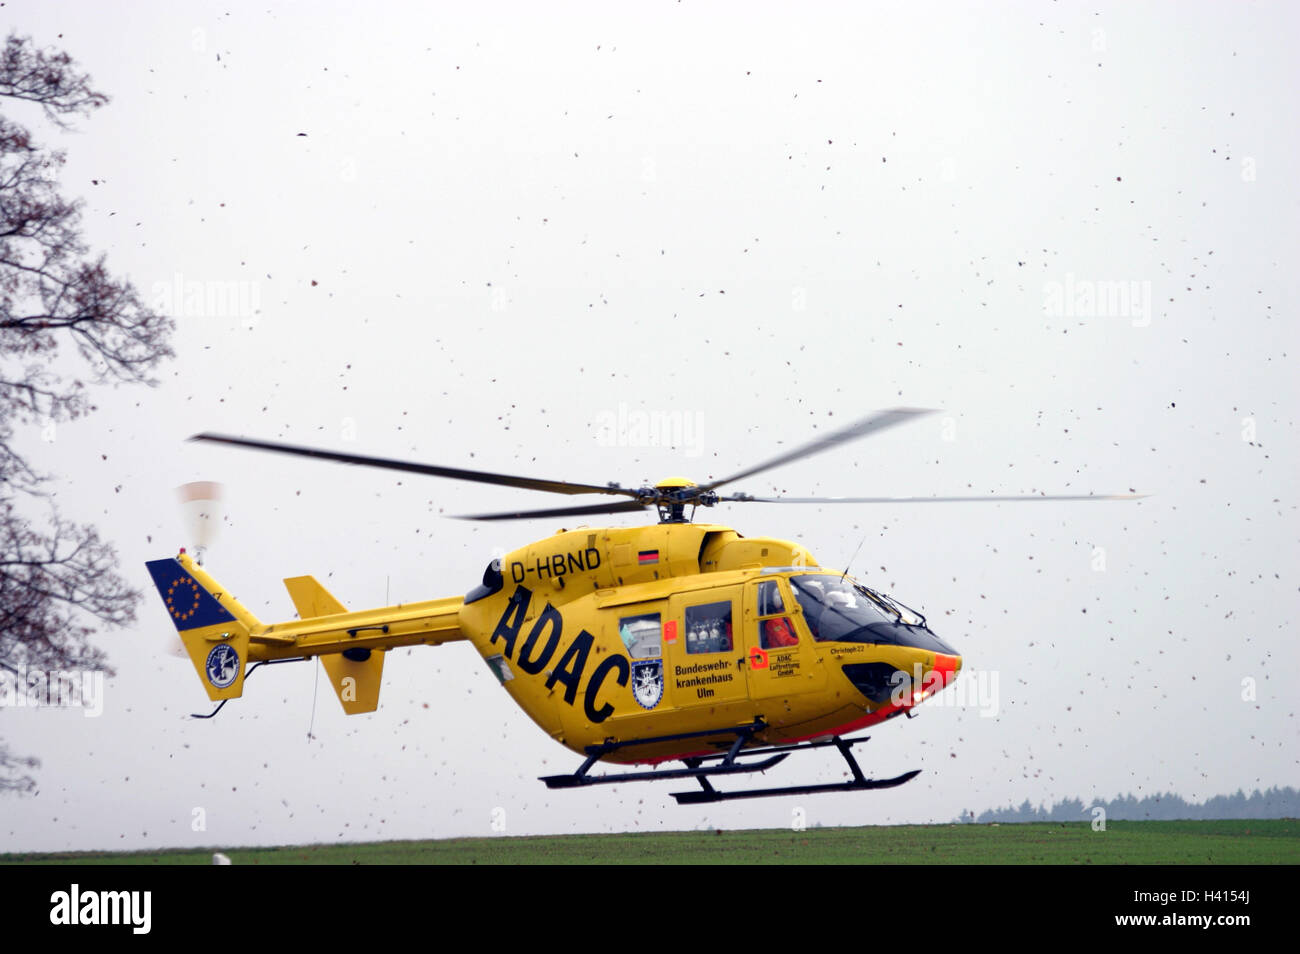 Meadow, ADAC rescue helicopter, landing, ADAC, rescue helicopter, helicopter, helicopter, accident help, first aid, flight rescue, rescue, help, emergency, entry, emergency entry, accident, lifesaver, no property release, Stock Photo